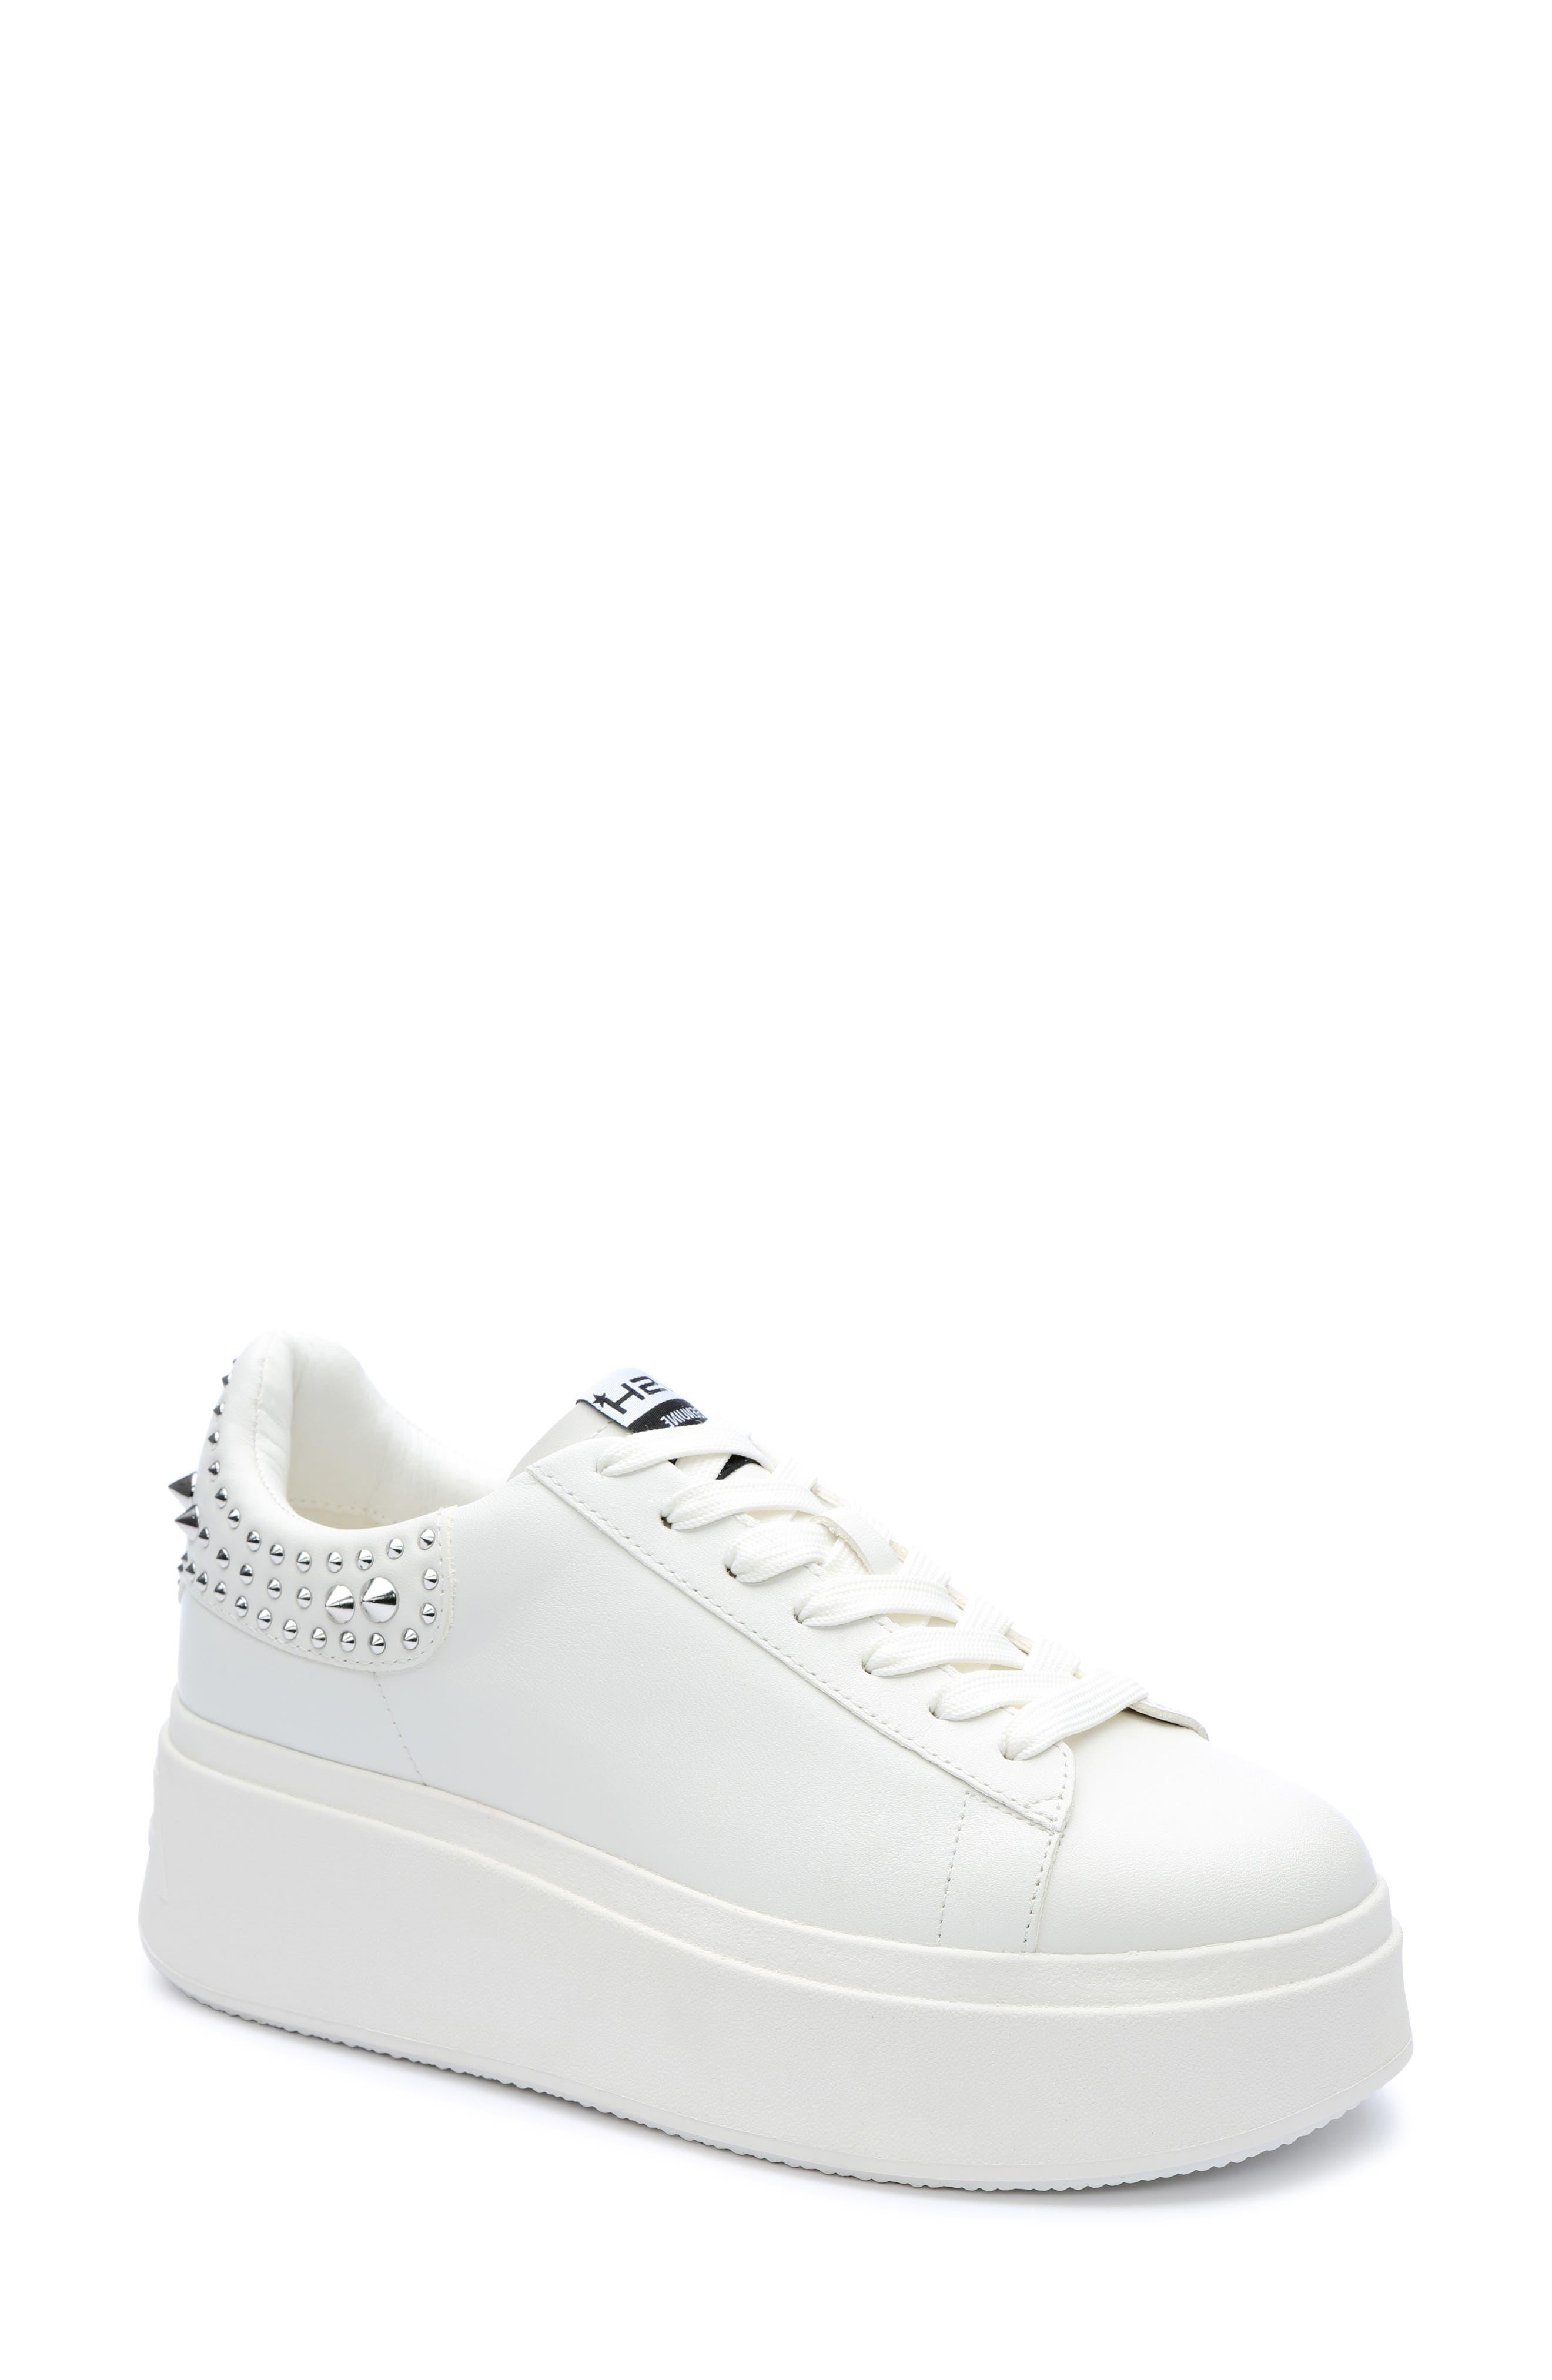 Ash Moby Studs Platform Sneaker in White | Lyst